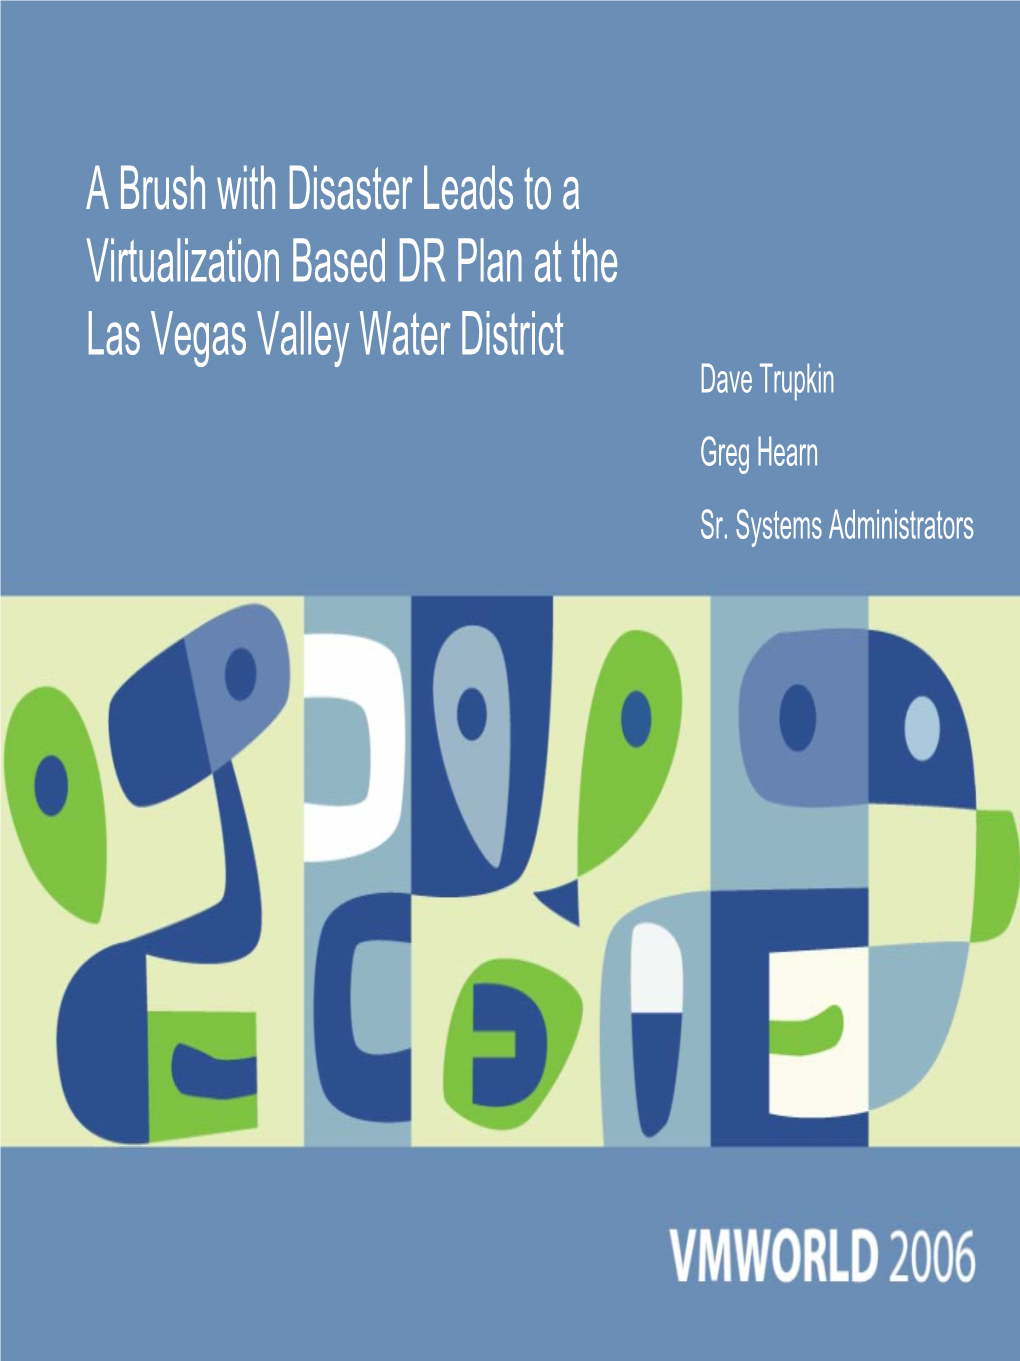 A Brush with Disaster Leads to a Virtualization Based DR Plan at the Las Vegas Valley Water District Dave Trupkin Greg Hearn Sr